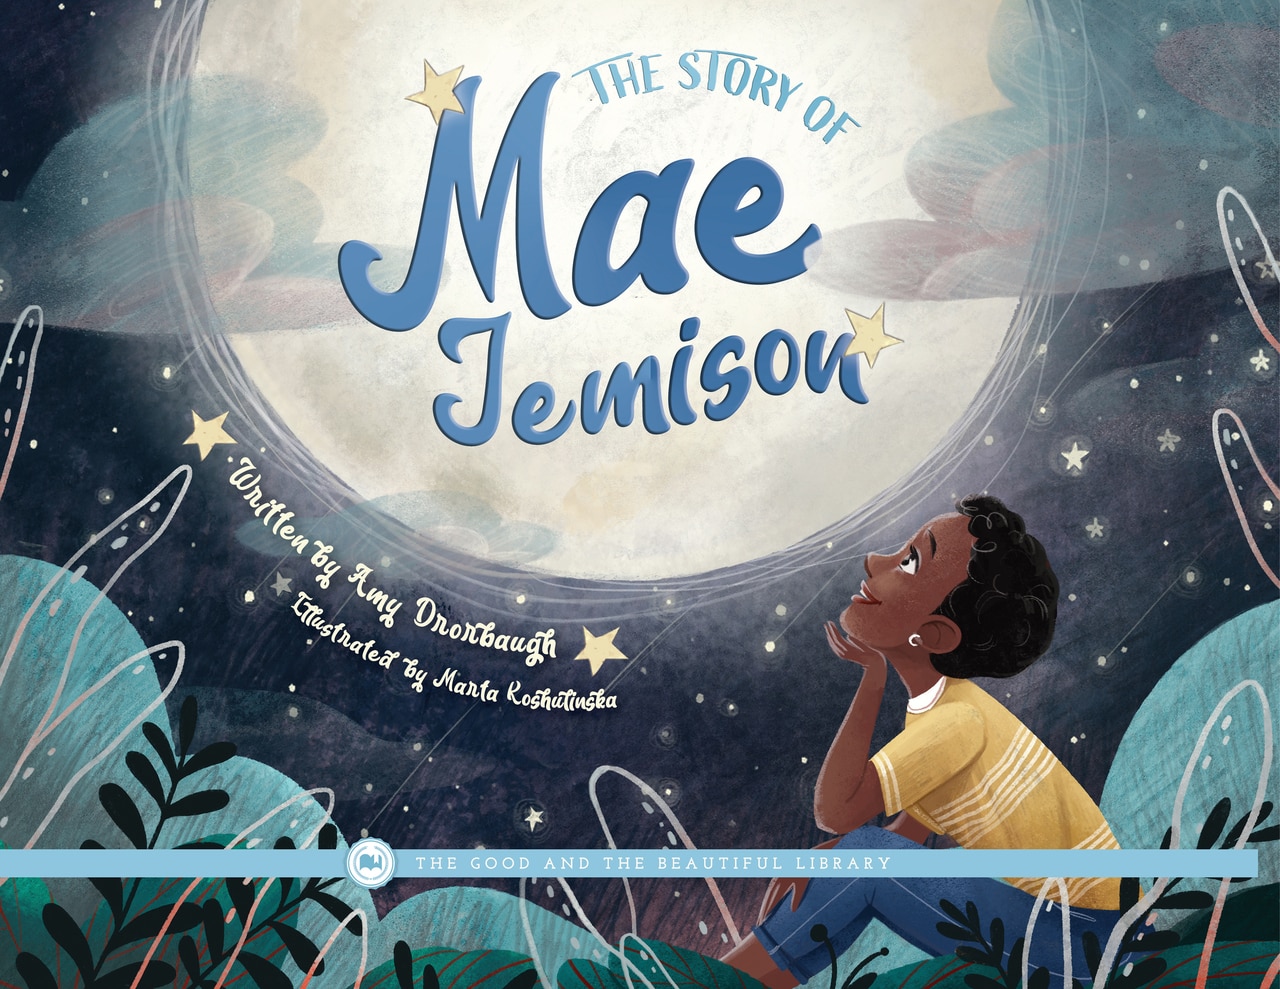 The Story of Mae Jemison: by Amy Drorbaugh - The Good and the Beautiful